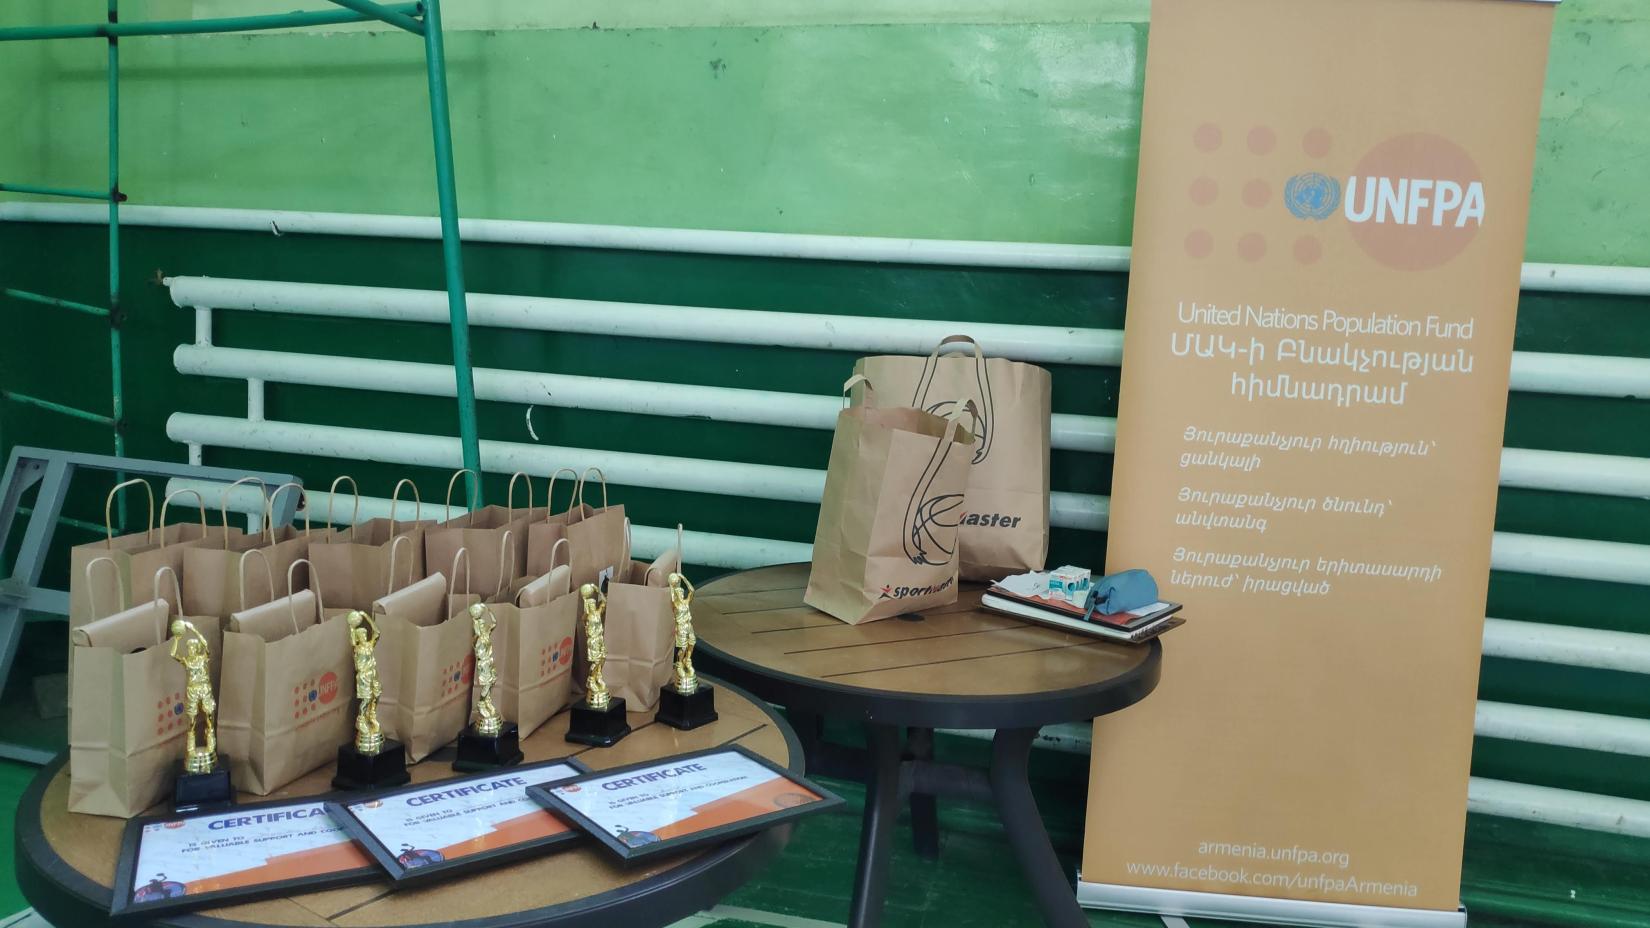 Prizes and souvenirs from UNFPA Armenia.